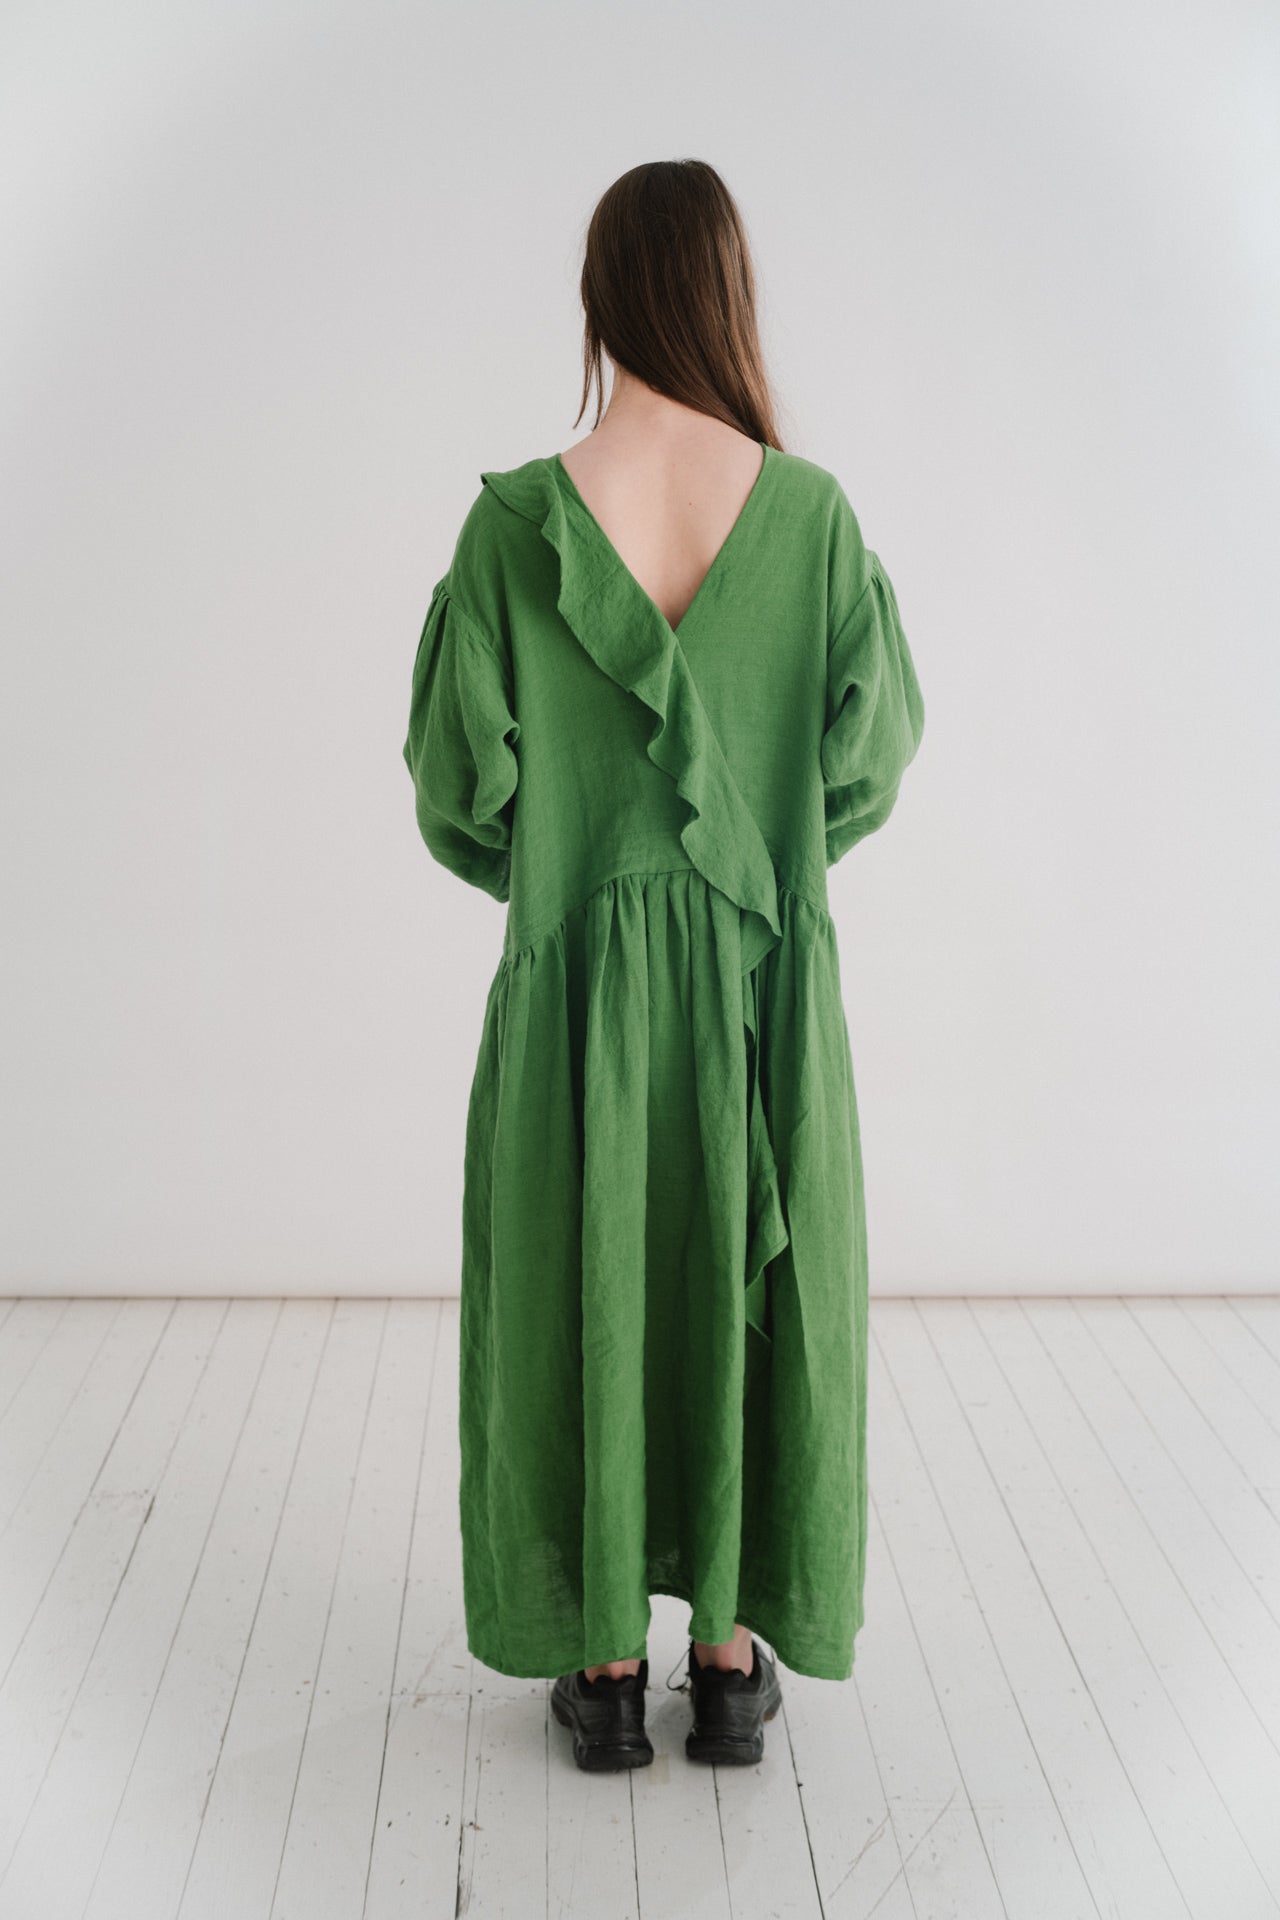 THE STELLA DRESS | Our Stella dress is a new shape for Spring Summer. Easy to wear in her simplicity and WEARABILITY, yet makes a bold statement with her colour and interesting cut. Like many of our pieces, she can be worn two ways - V neck to the front o